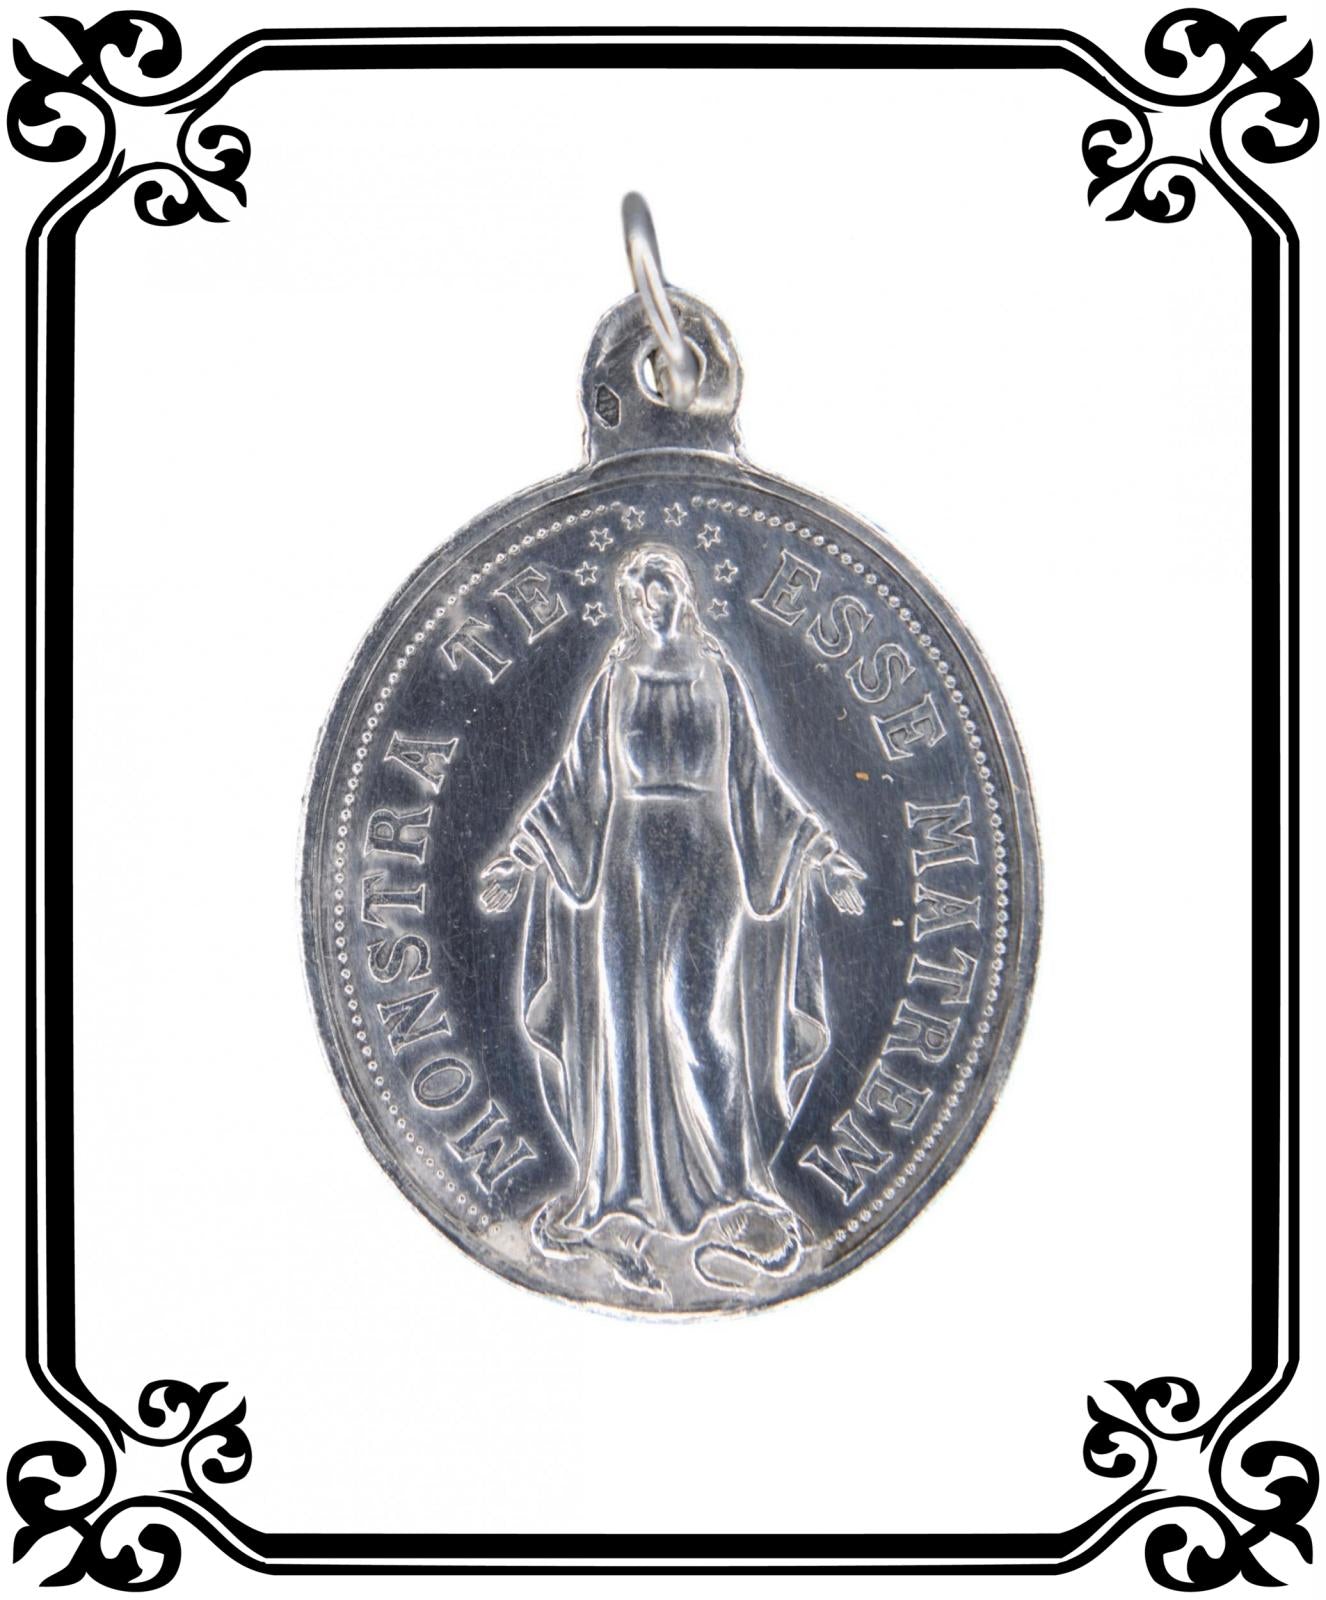 Religious Sterling Silver Medal - Charmantiques